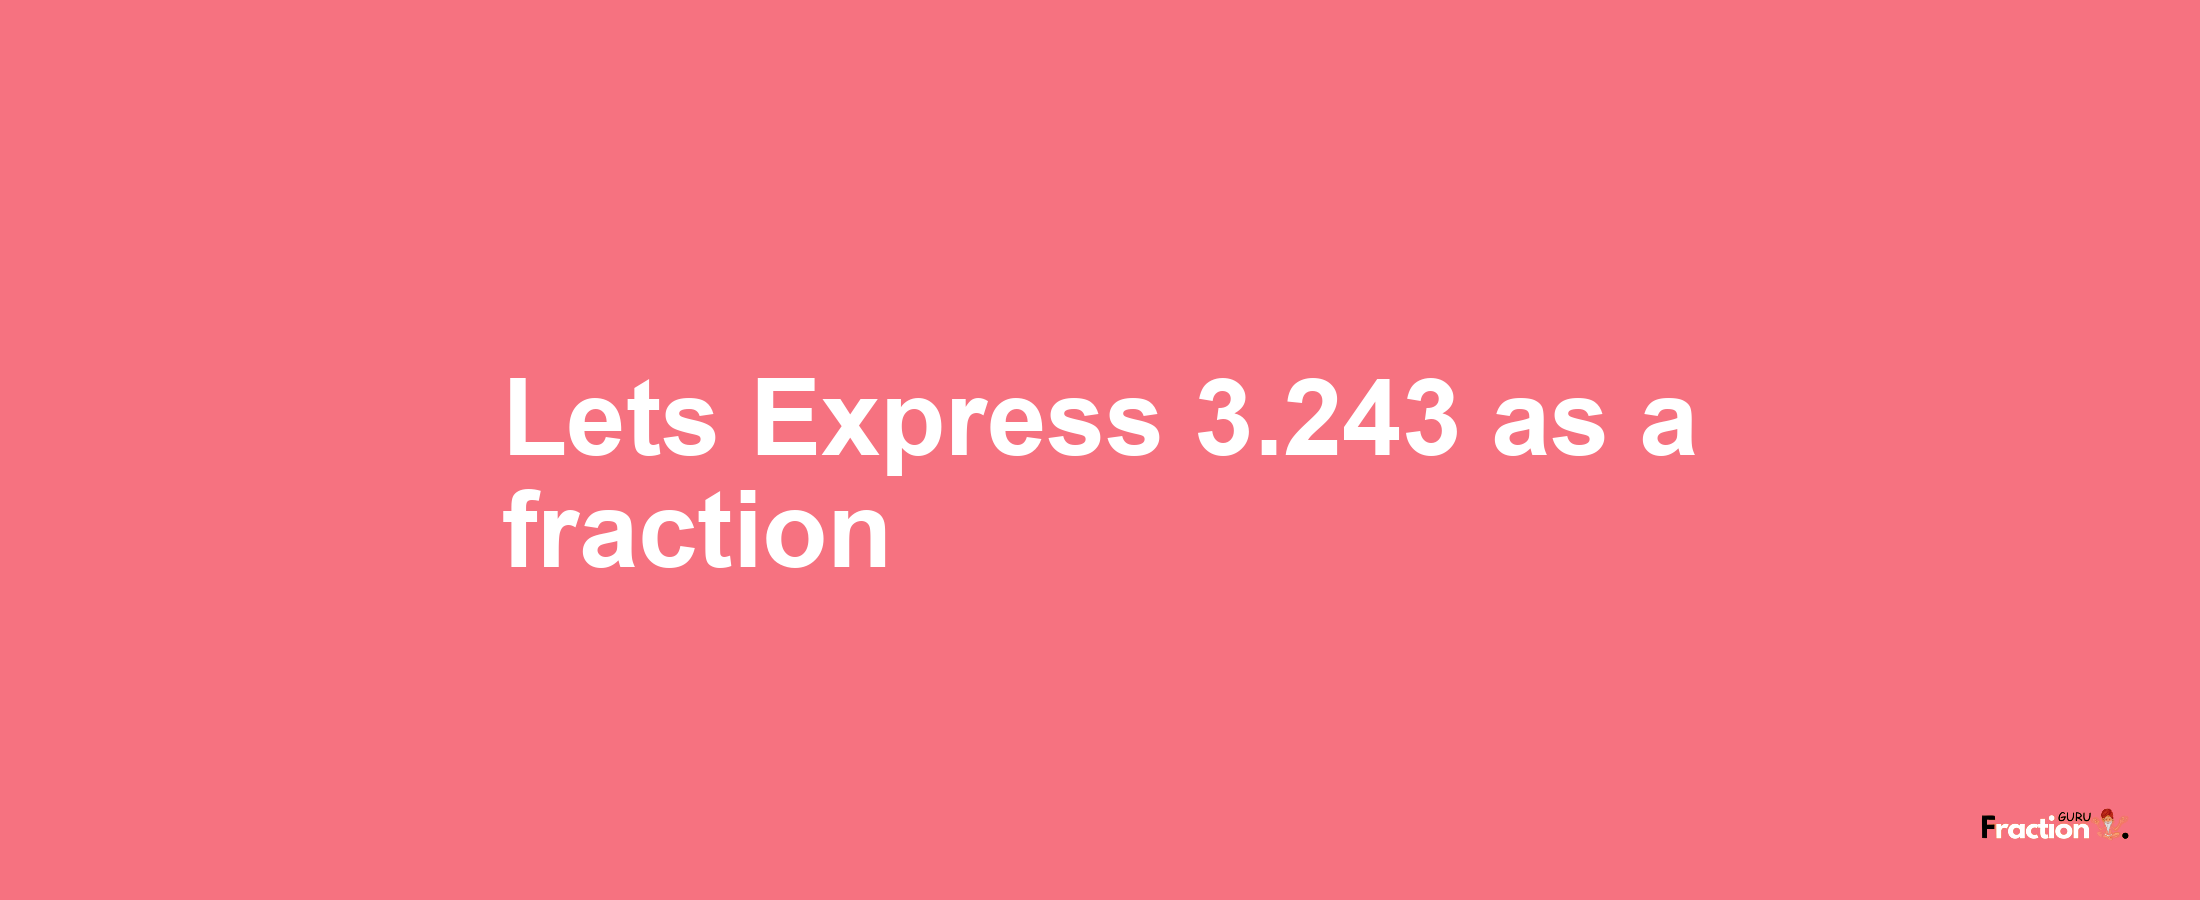 Lets Express 3.243 as afraction